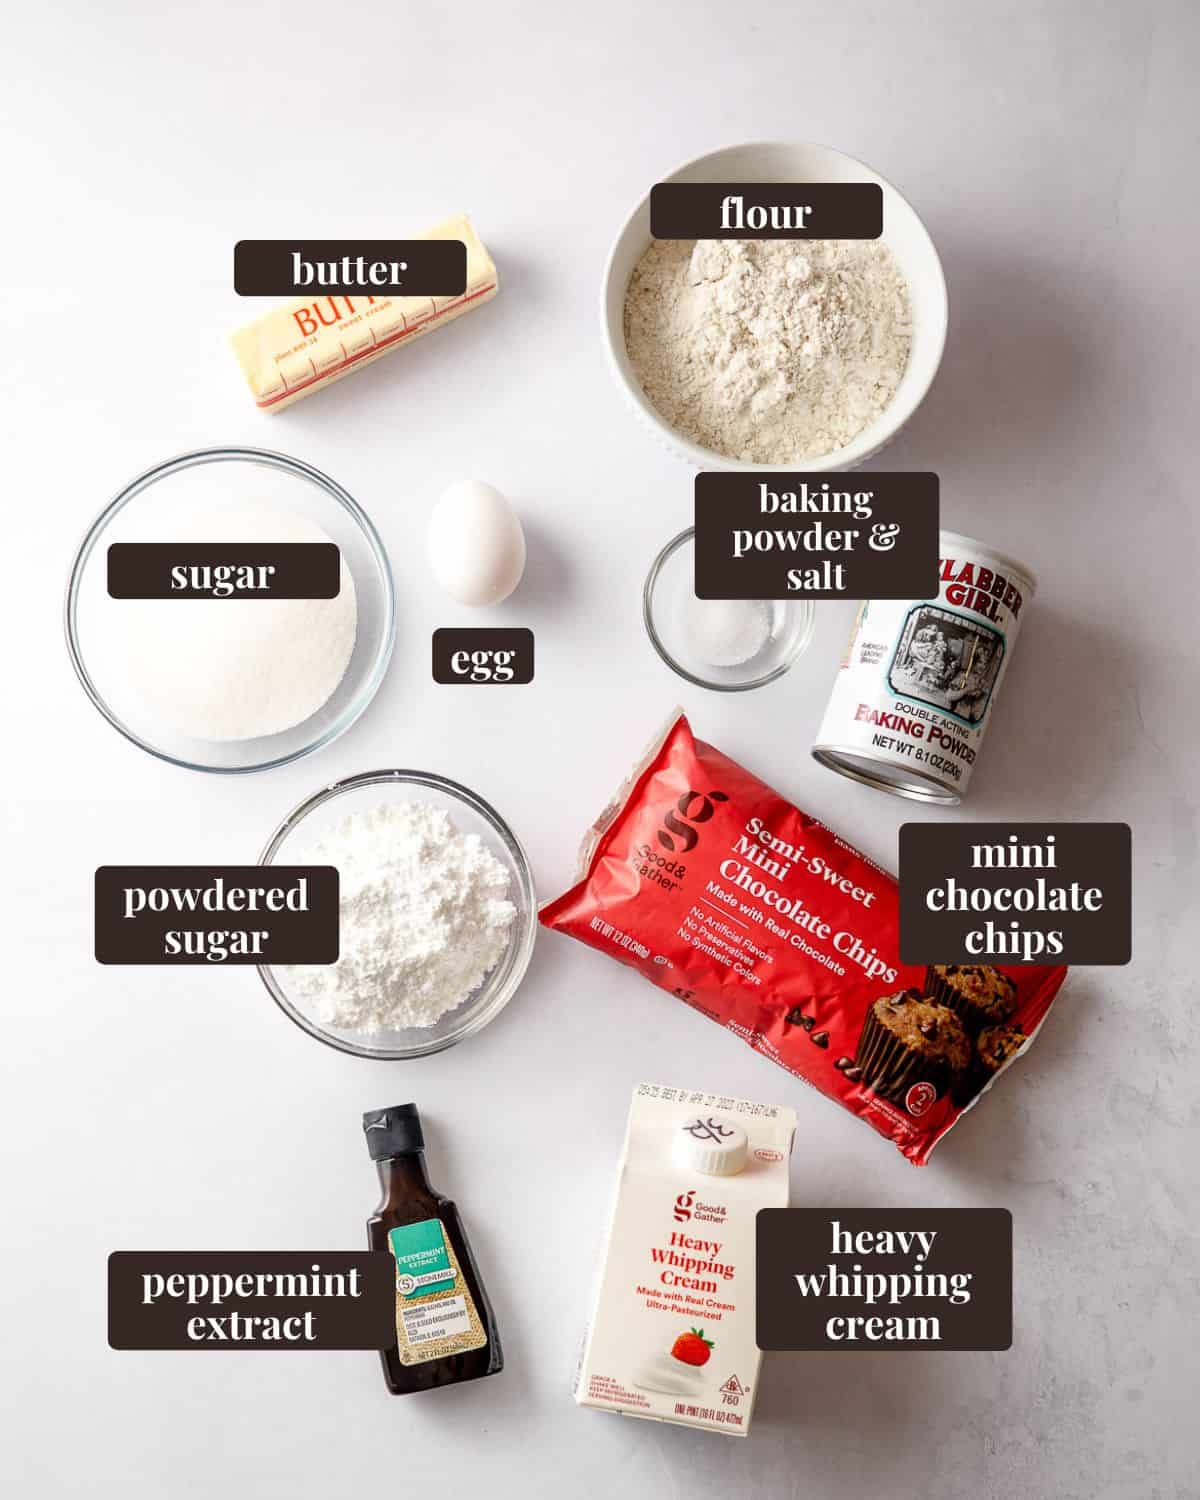 Ingredient arranged and labeled for mint chip cookies: butter, flour, sugar, egg, baking powder and salt, powdered sugar, mini chocolate chips, peppermint extract, and heavy whipping cream.